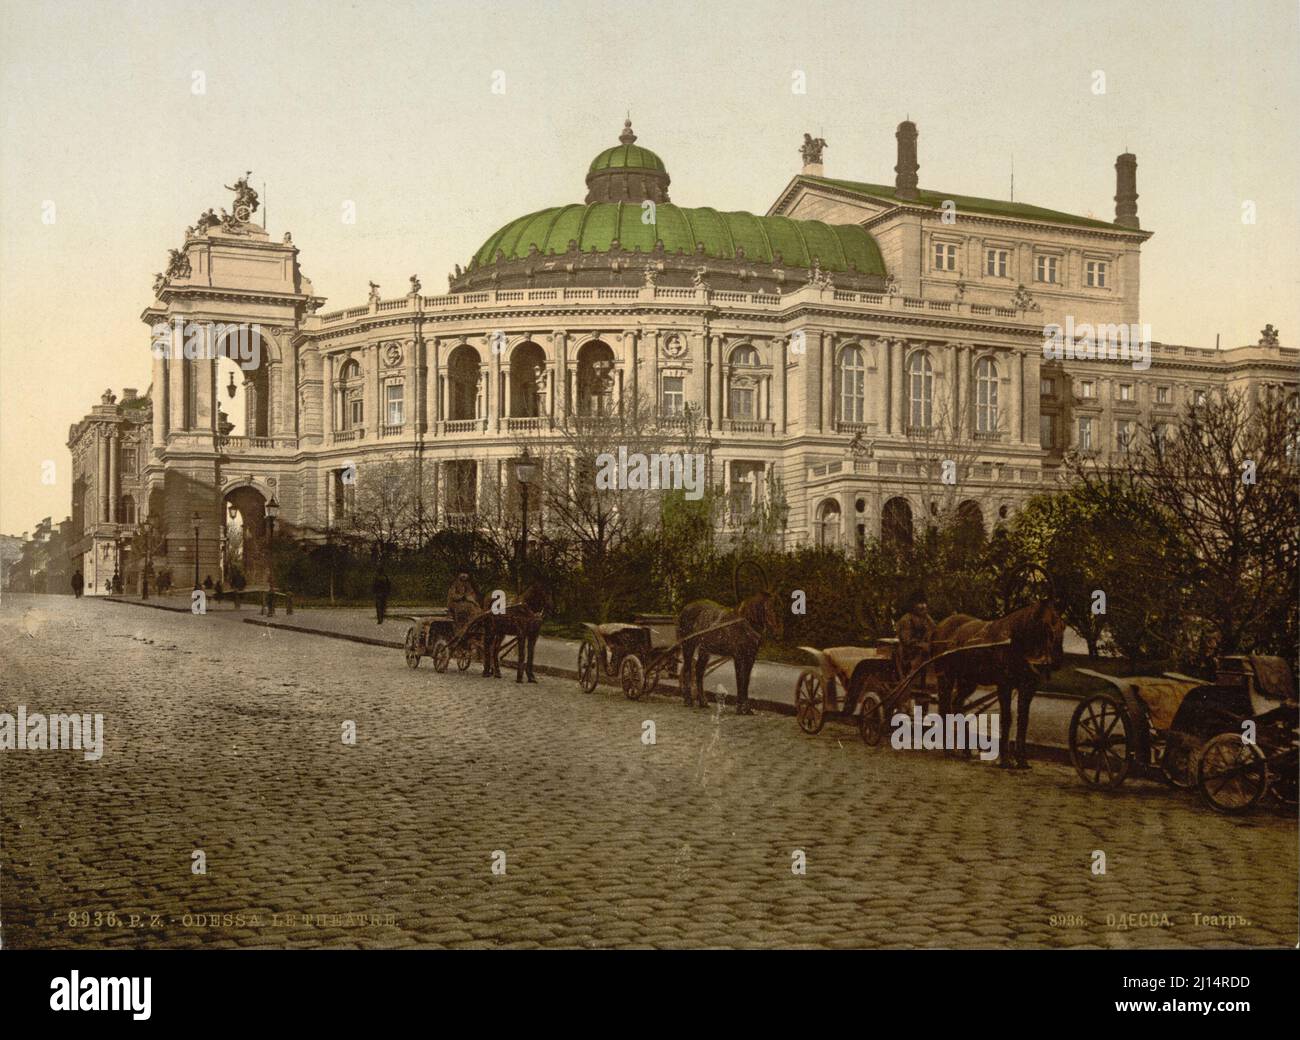 Vintage polychrom print ca. 1890-1900 of the Odessa theatre and opera house in the city of Odessa (Odesa), Ukraine Stock Photo